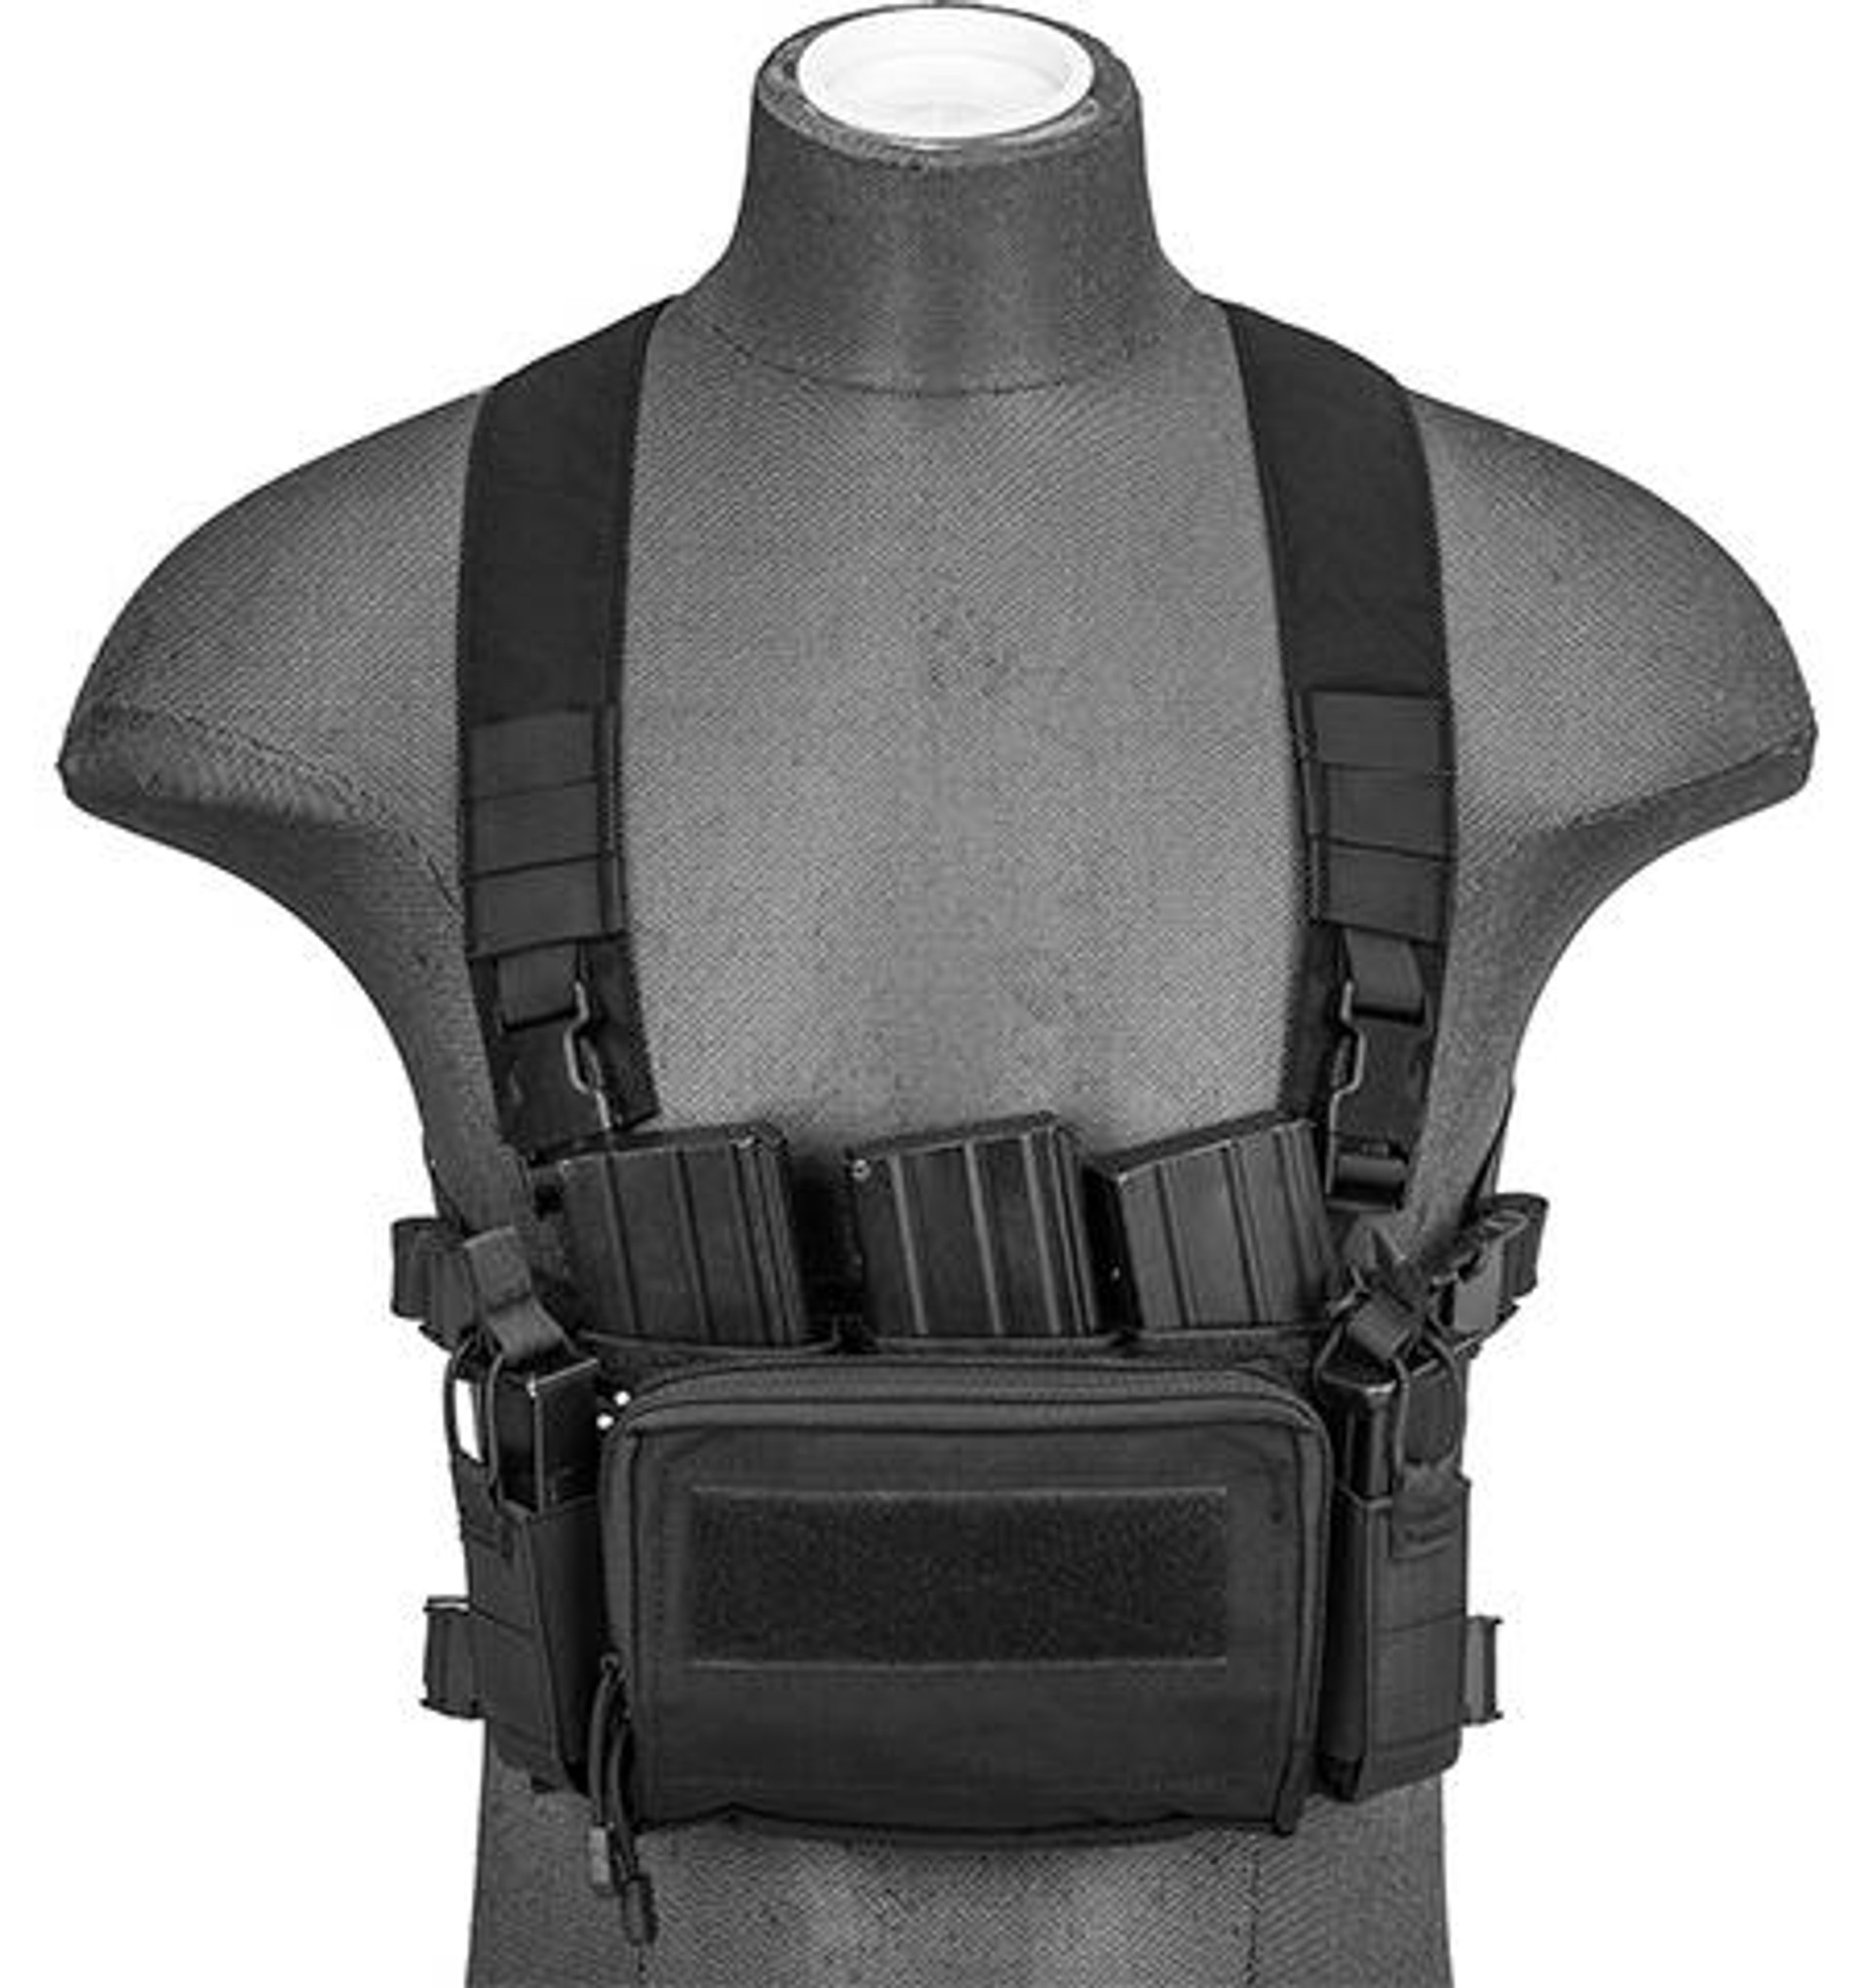 WoSport Multifunctional Tactical Chest Rig, Black | Airsoft Station